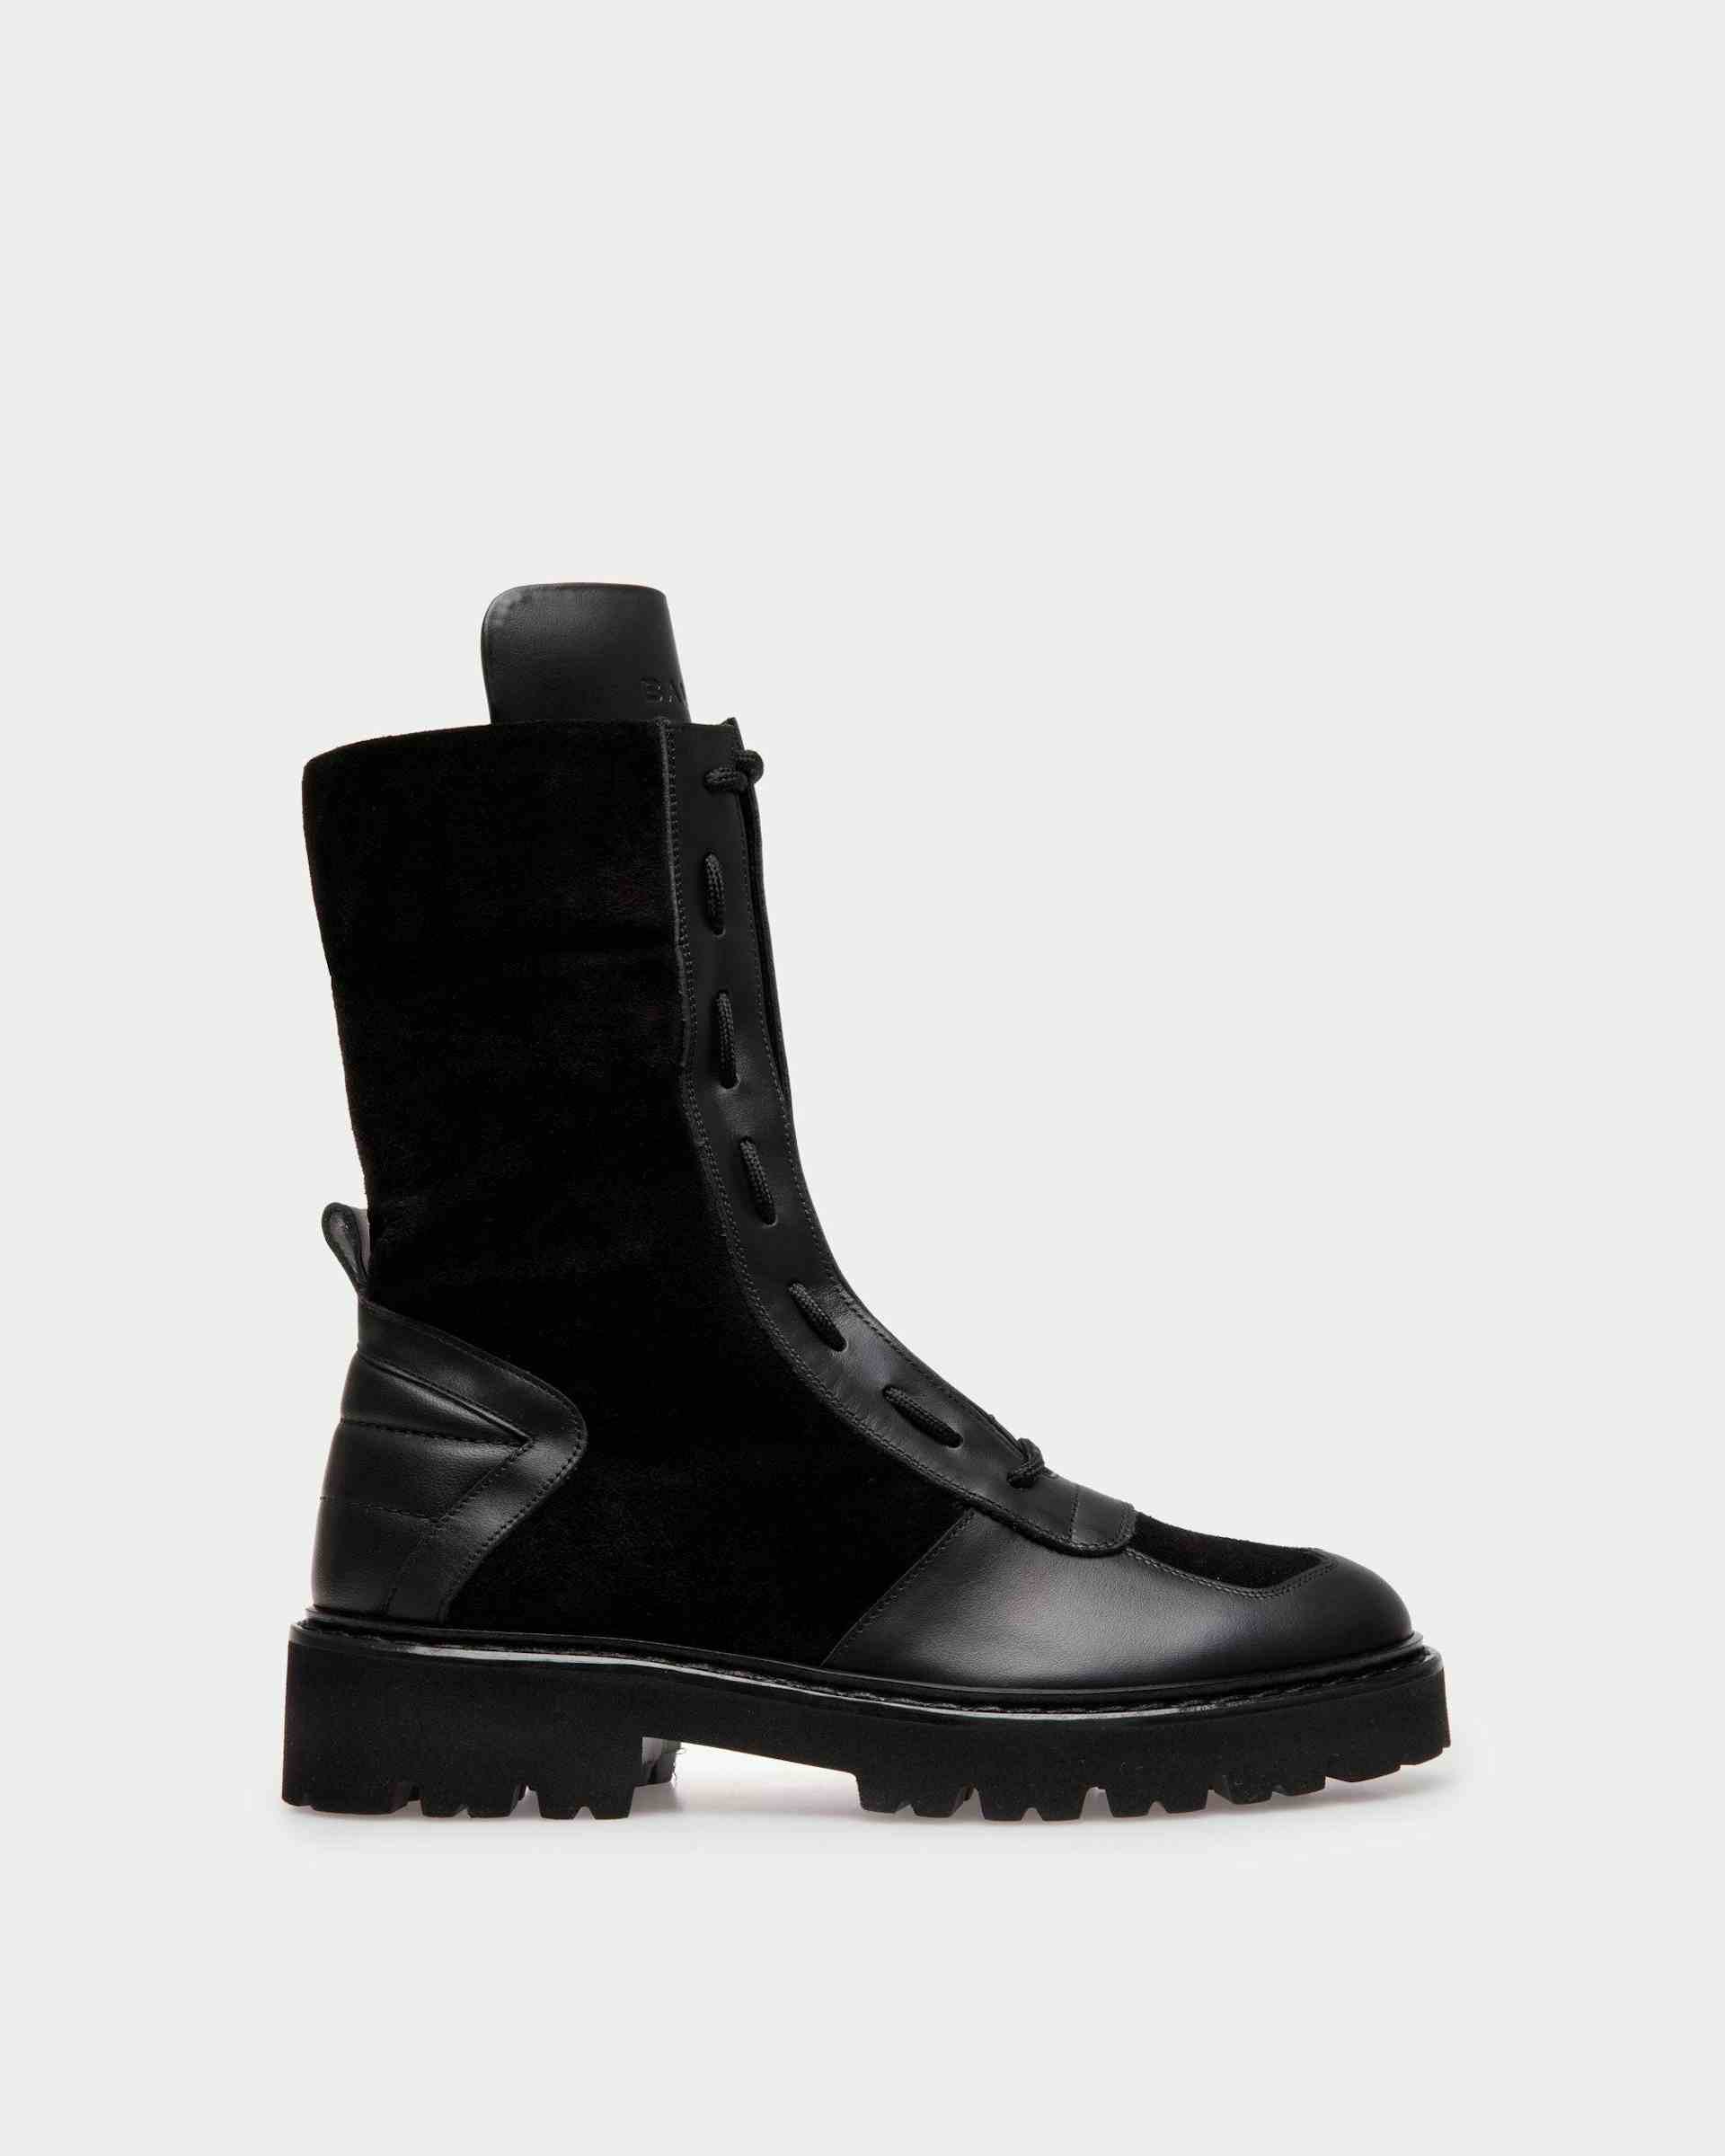 Enga Boots In Black Leather - Women's - Bally